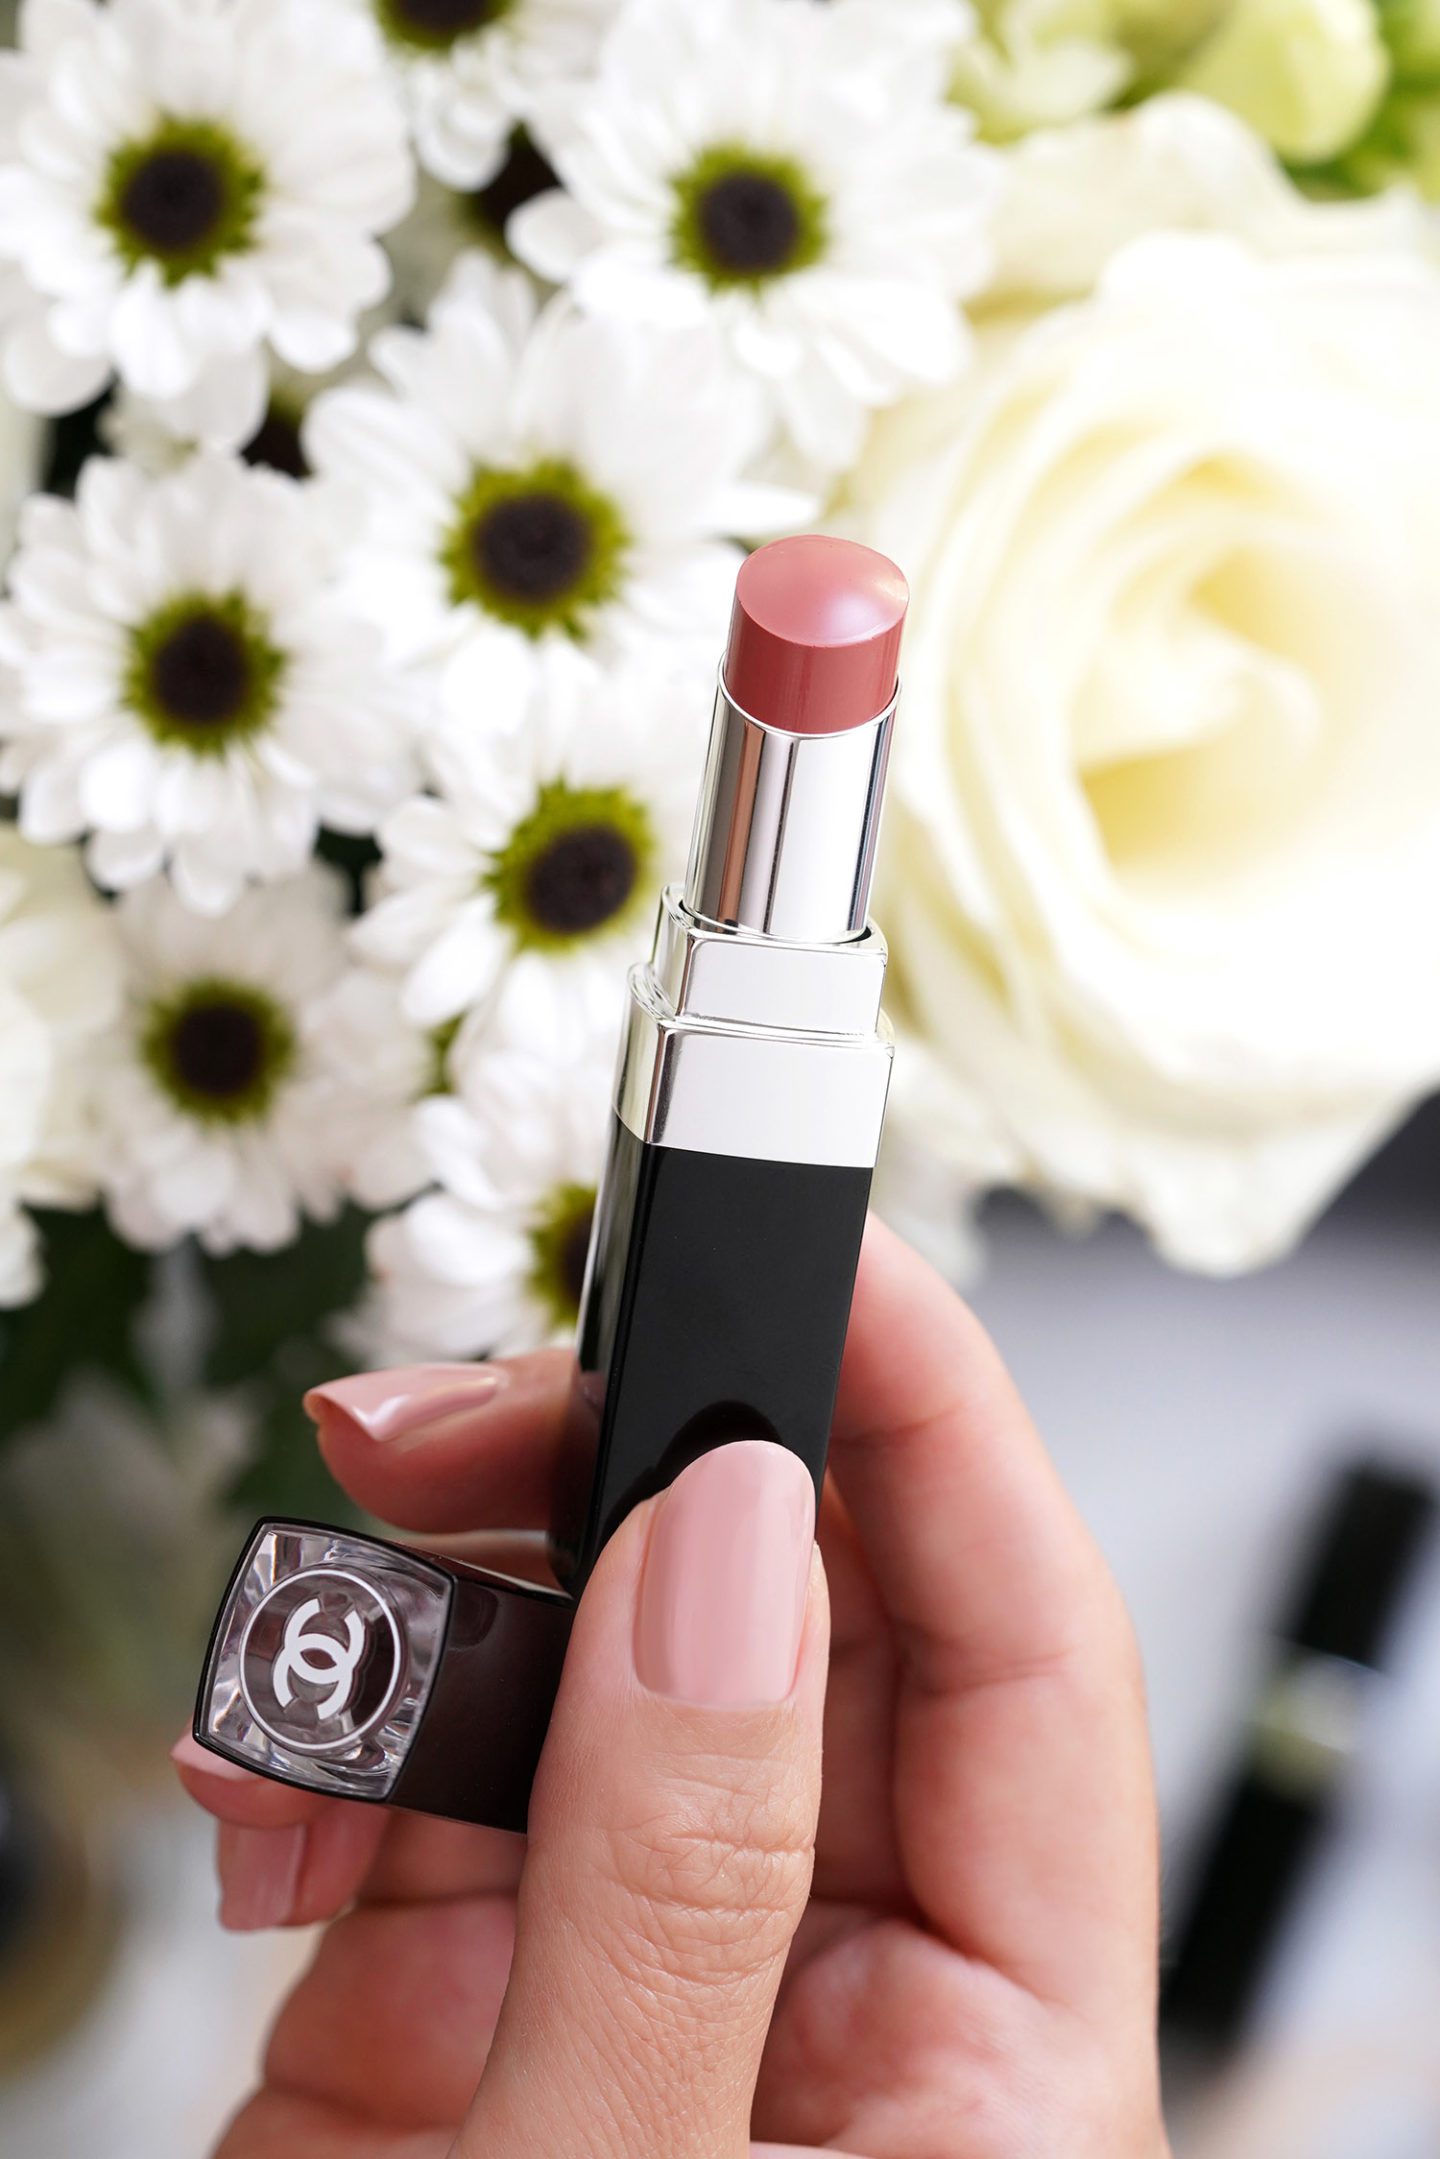 Chanel Rouge Coco Bloom in Chance